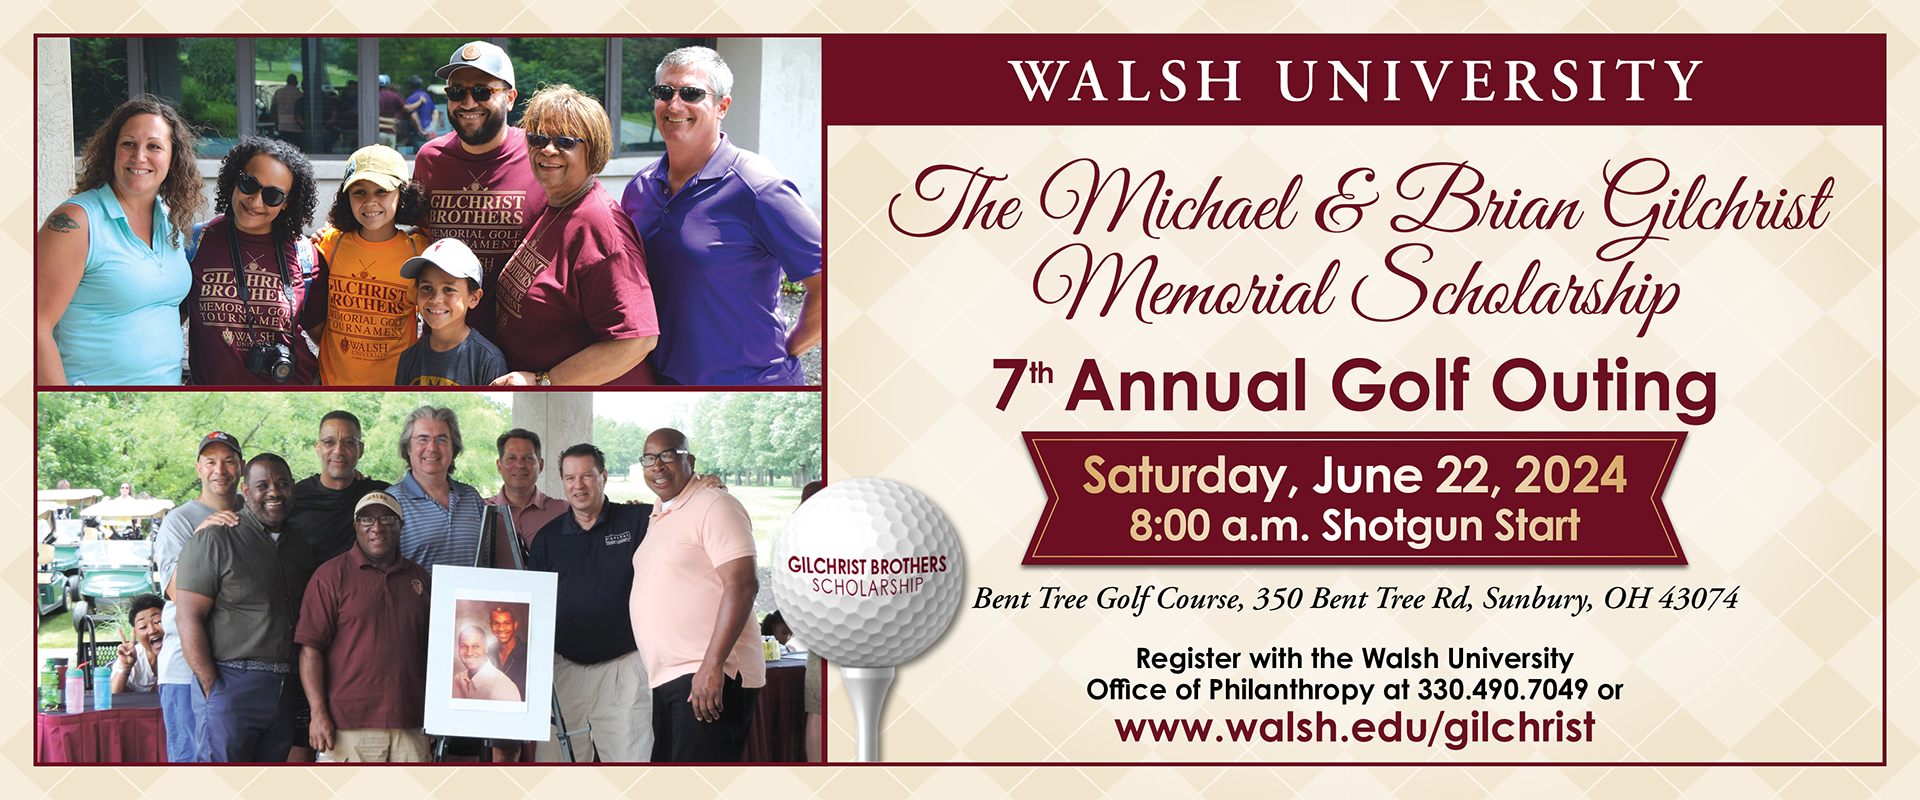 Walsh University, Michael and Brian Gilchrist Memorial Scholarship, 7th Annual Golf Outing, Saturday, June 22, 2024, 8 AM Shotgun Start; Bent Tree Golf Course, 350 Bent Tree Road, Sunbury, OH 43074